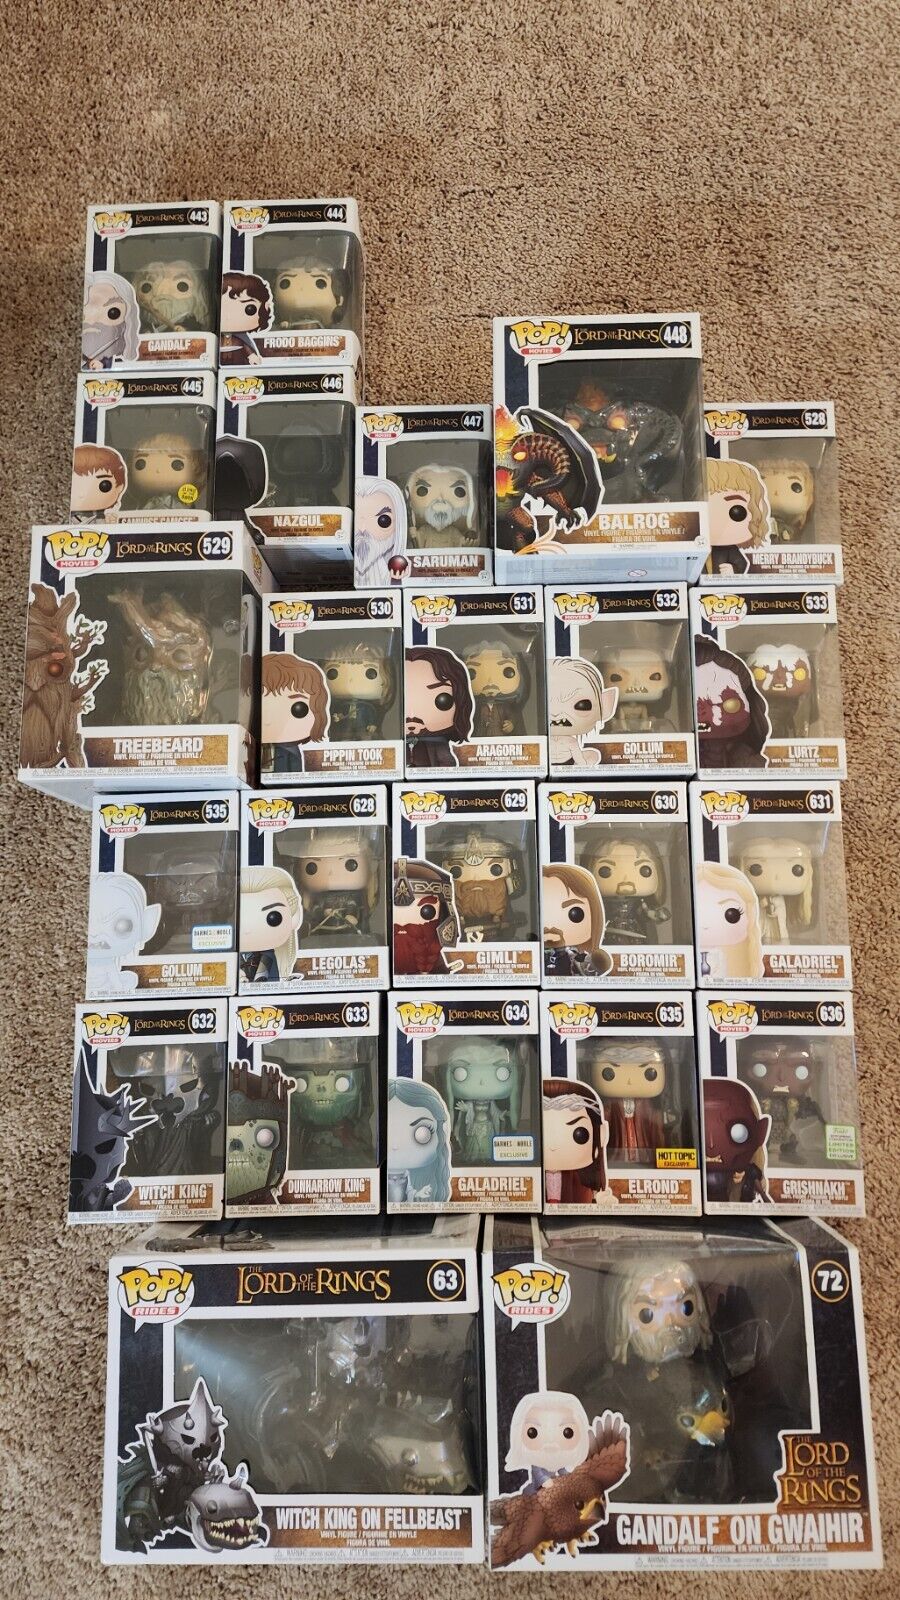 Lord of the Rings 24 Piece Funko Pop lot rare vaulted pops brand new never open